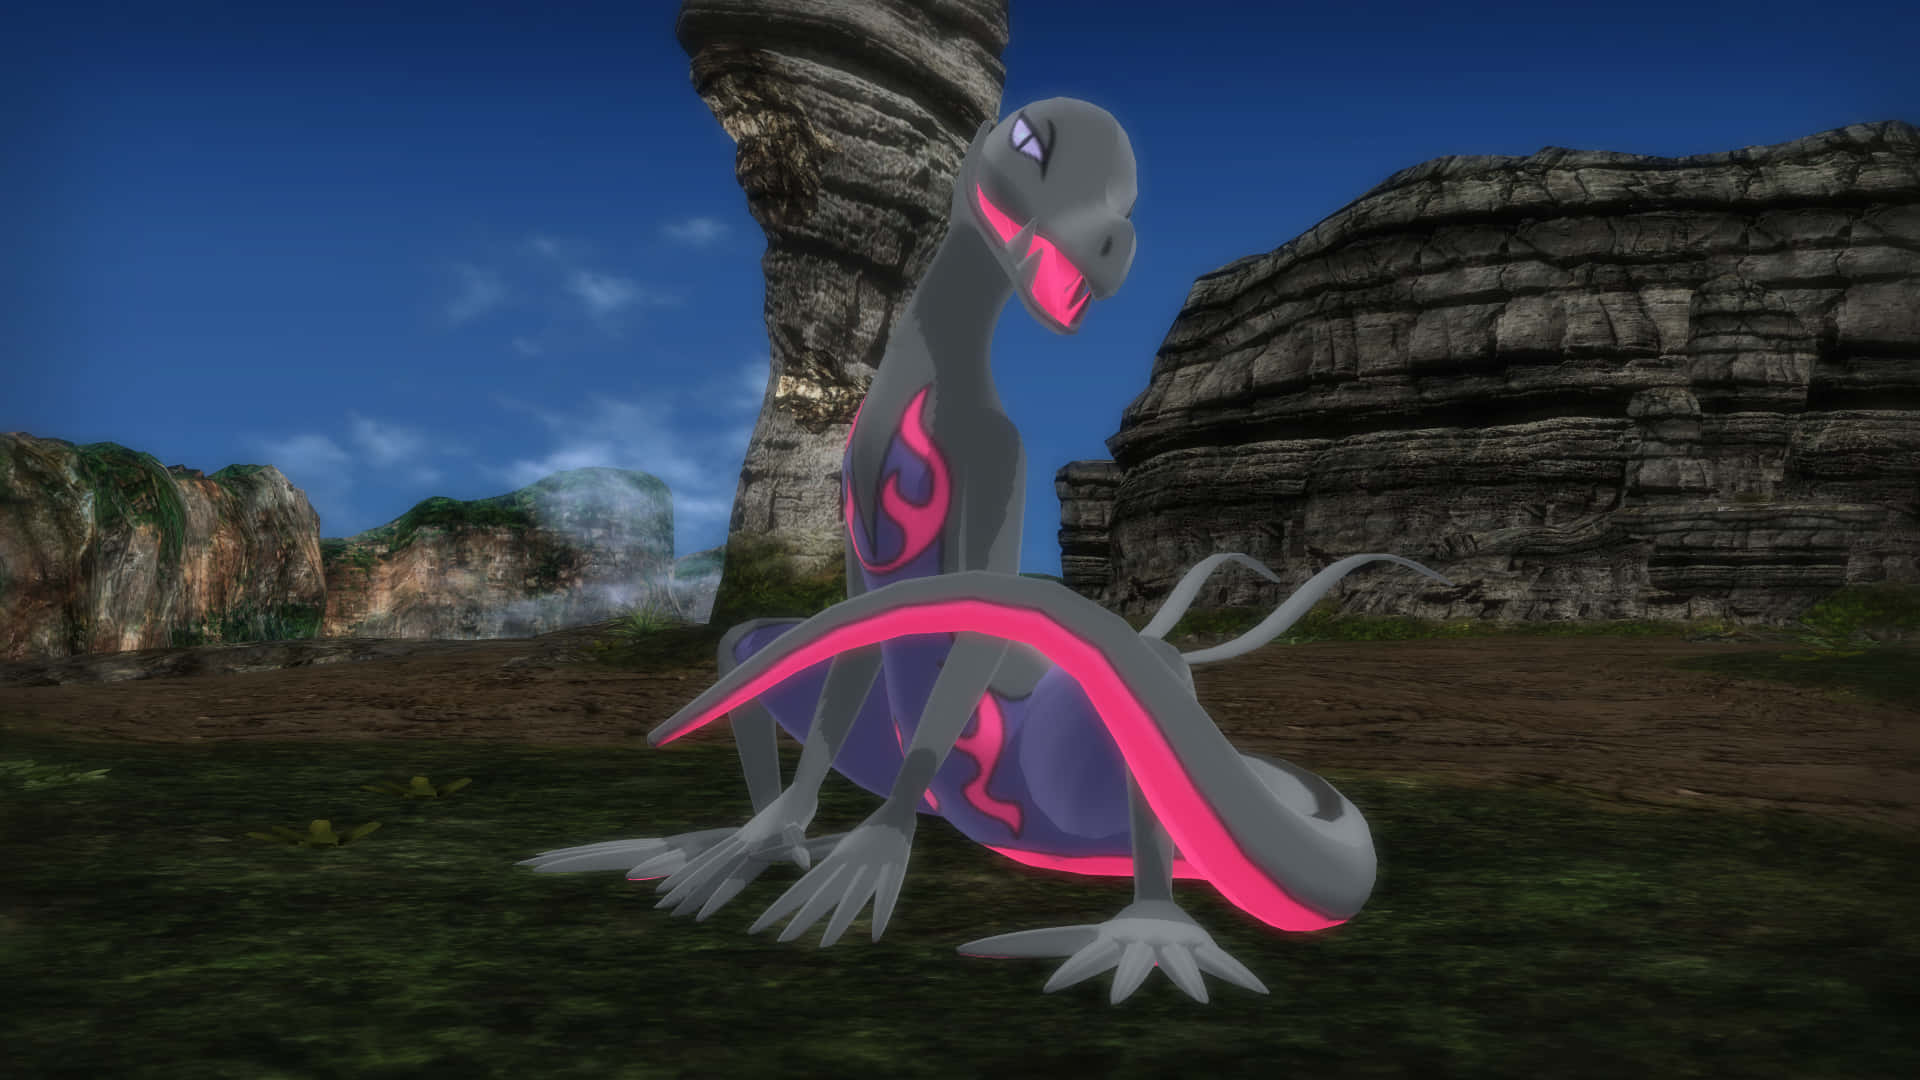 Pokémon Salazzle With Rock Formations Wallpaper